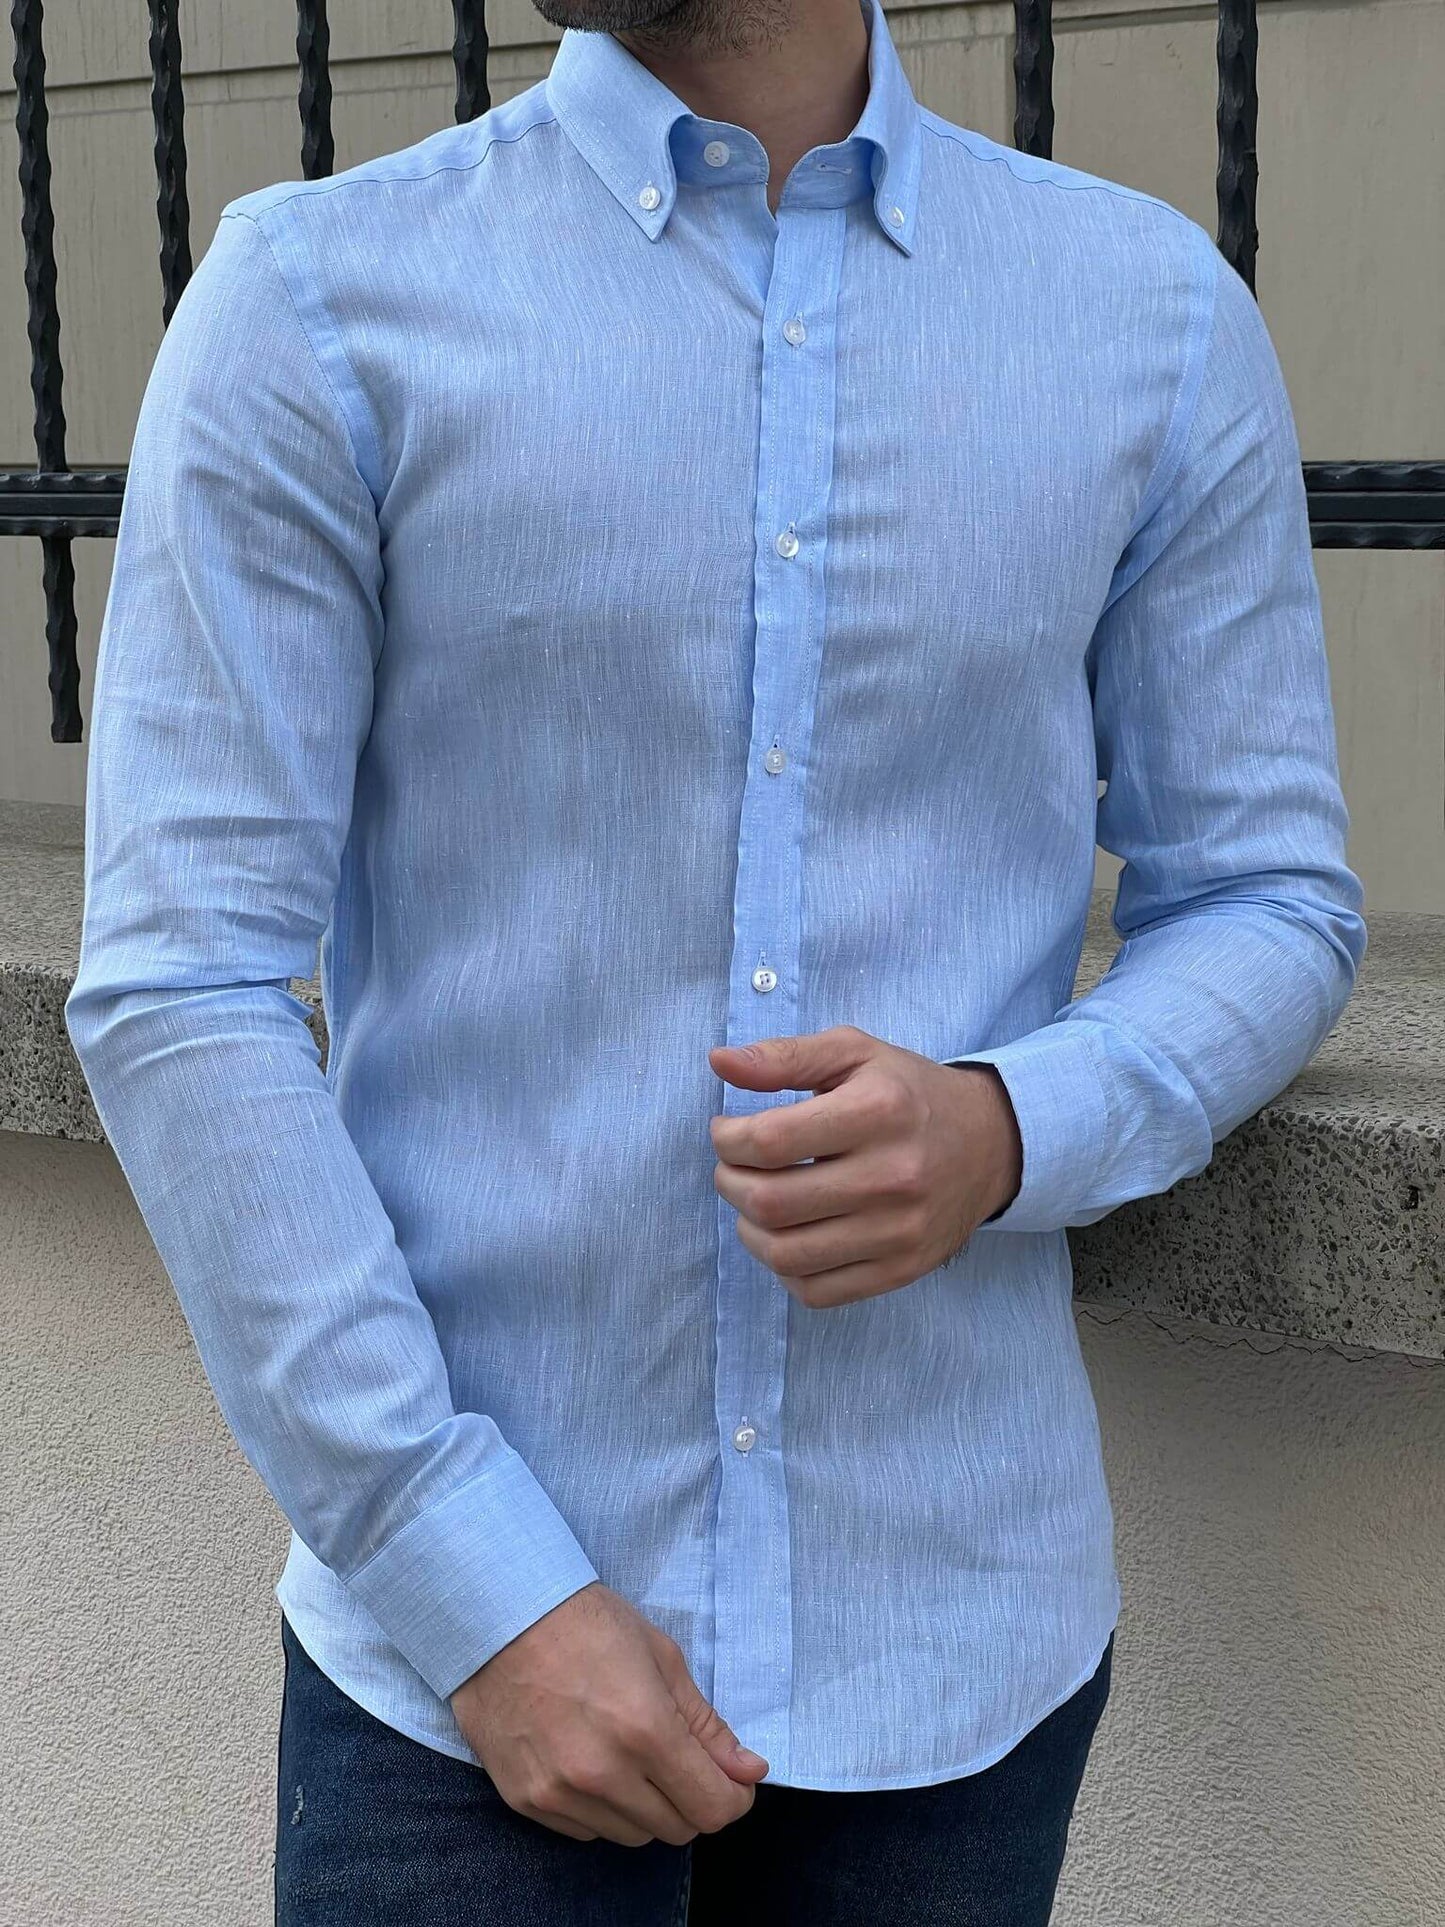 Capture the essence of casual sophistication with our male model wearing the Blue Linen Shirt, a timeless wardrobe staple